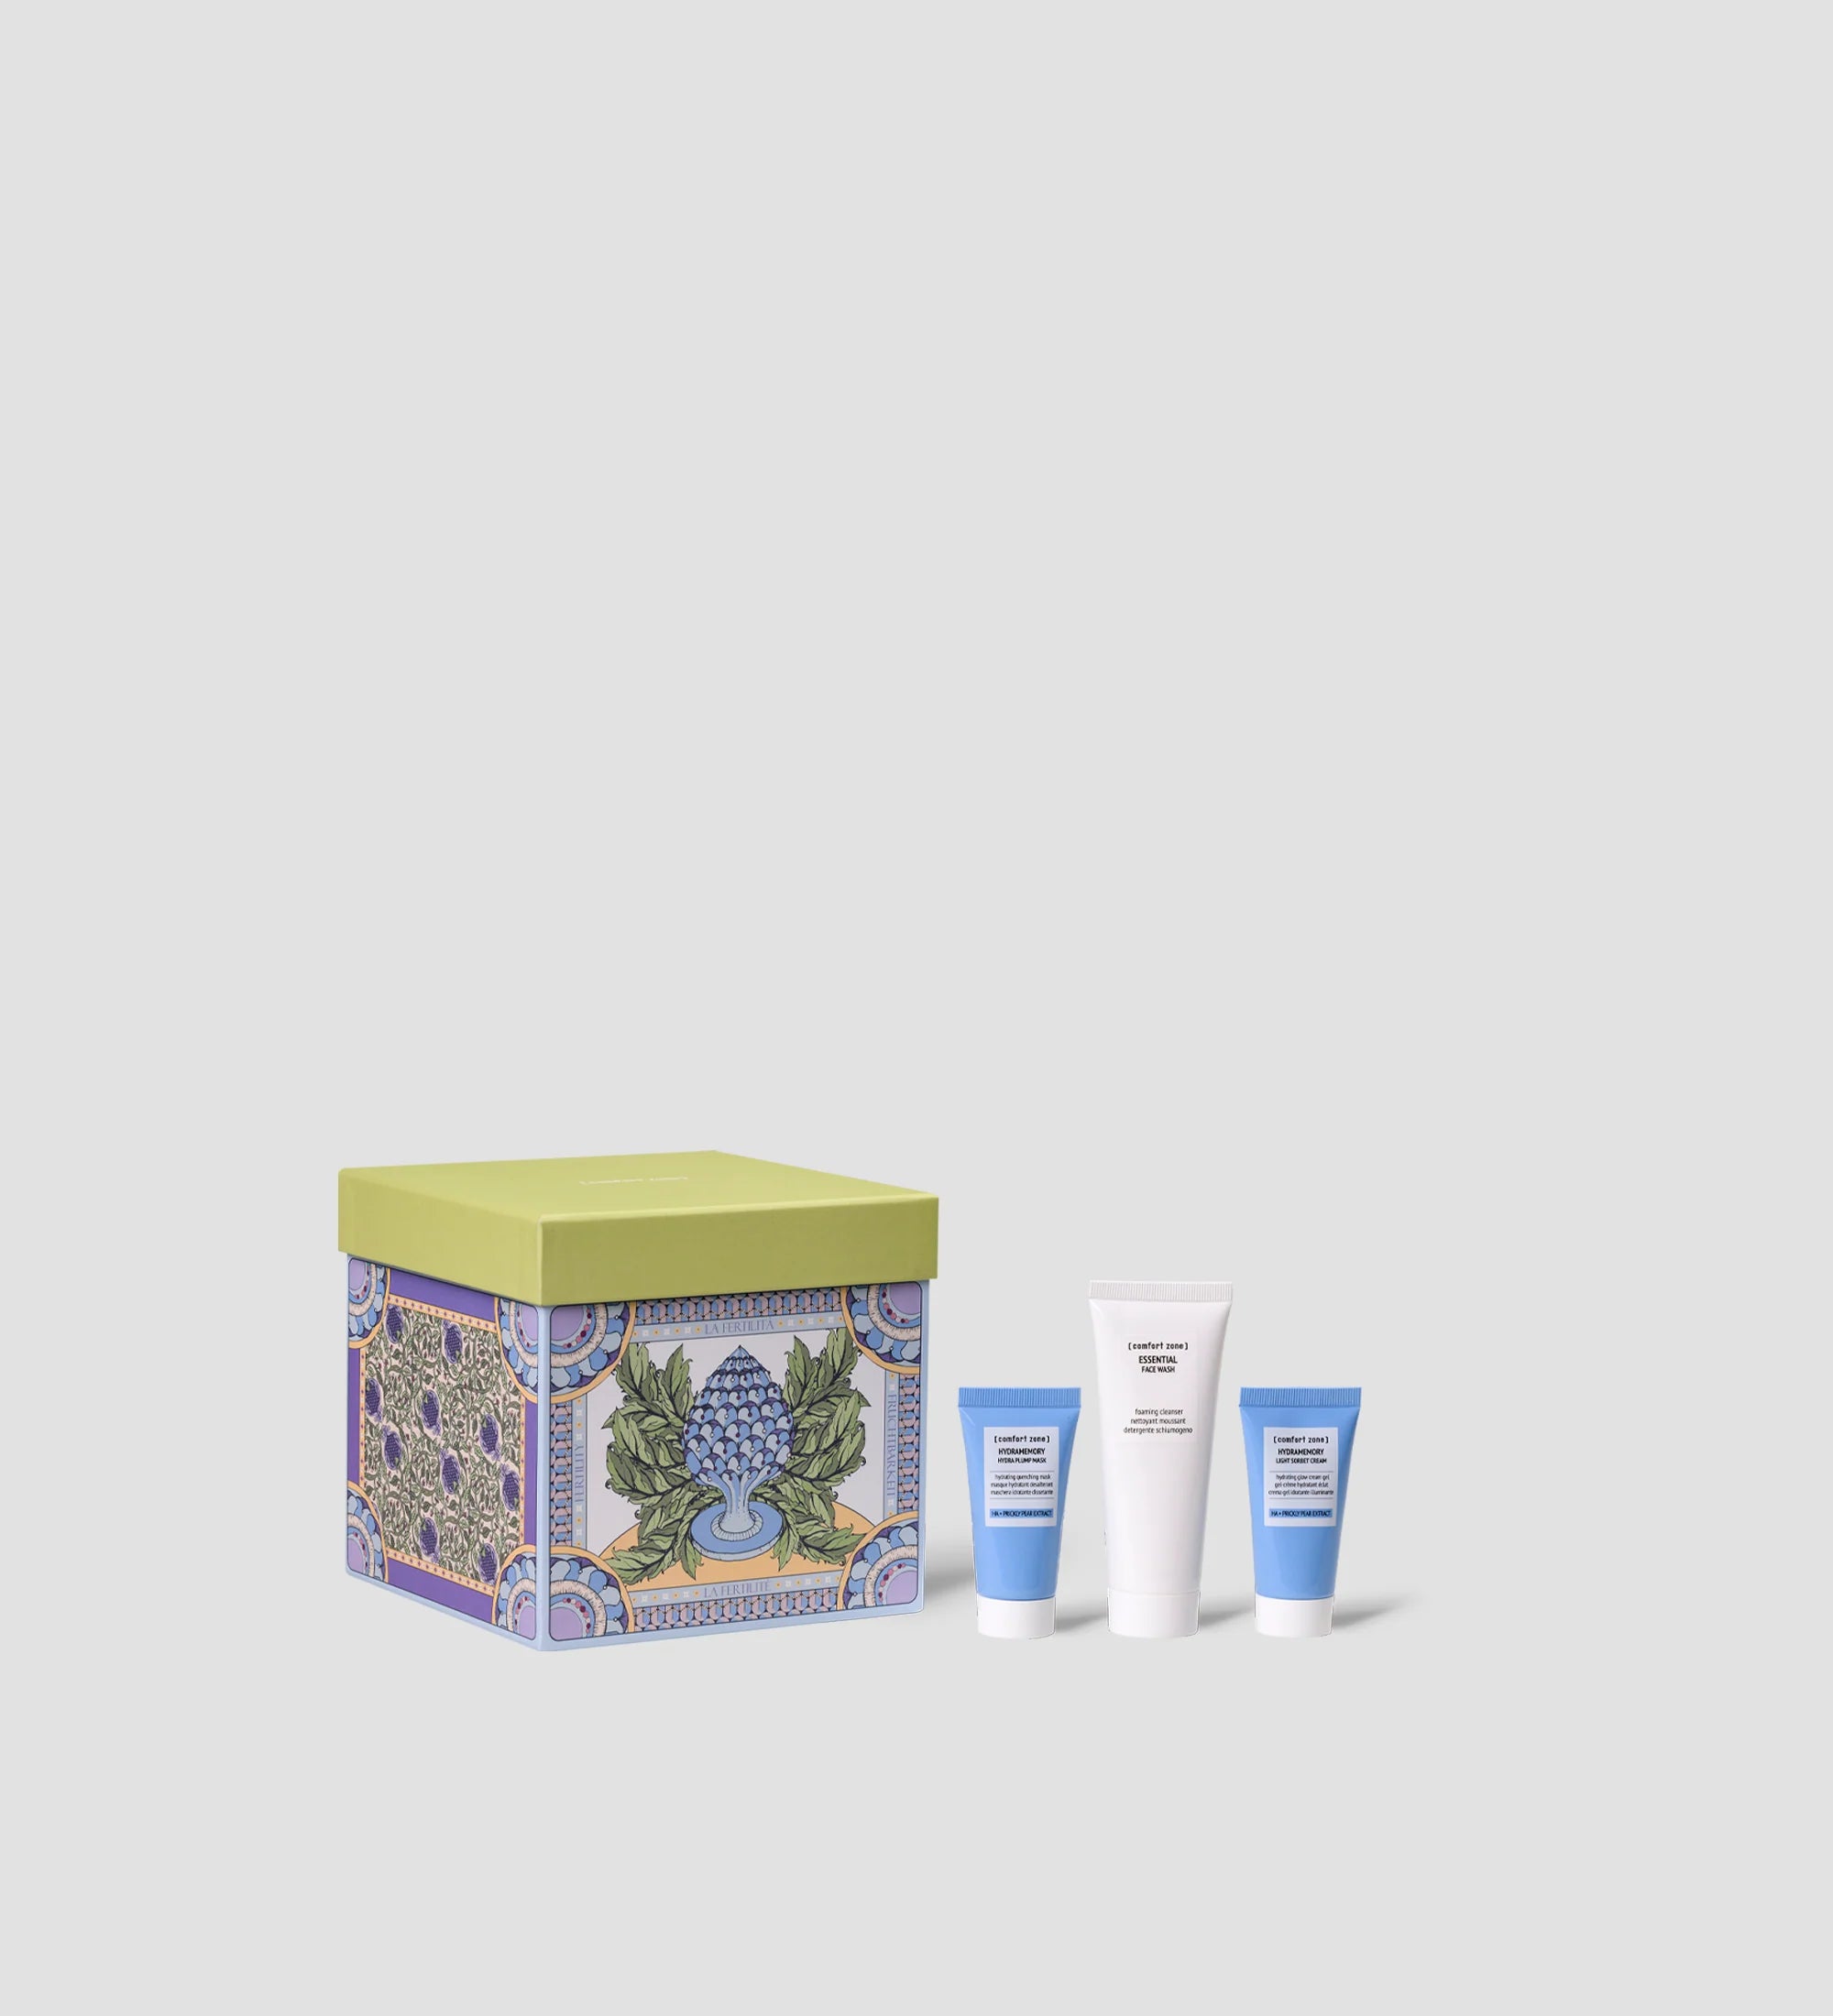 Comfort Zone: Hydramemory YOUNG KIT <p>CLEANSING HYDRATING FACE KIT</p>
-2000x
